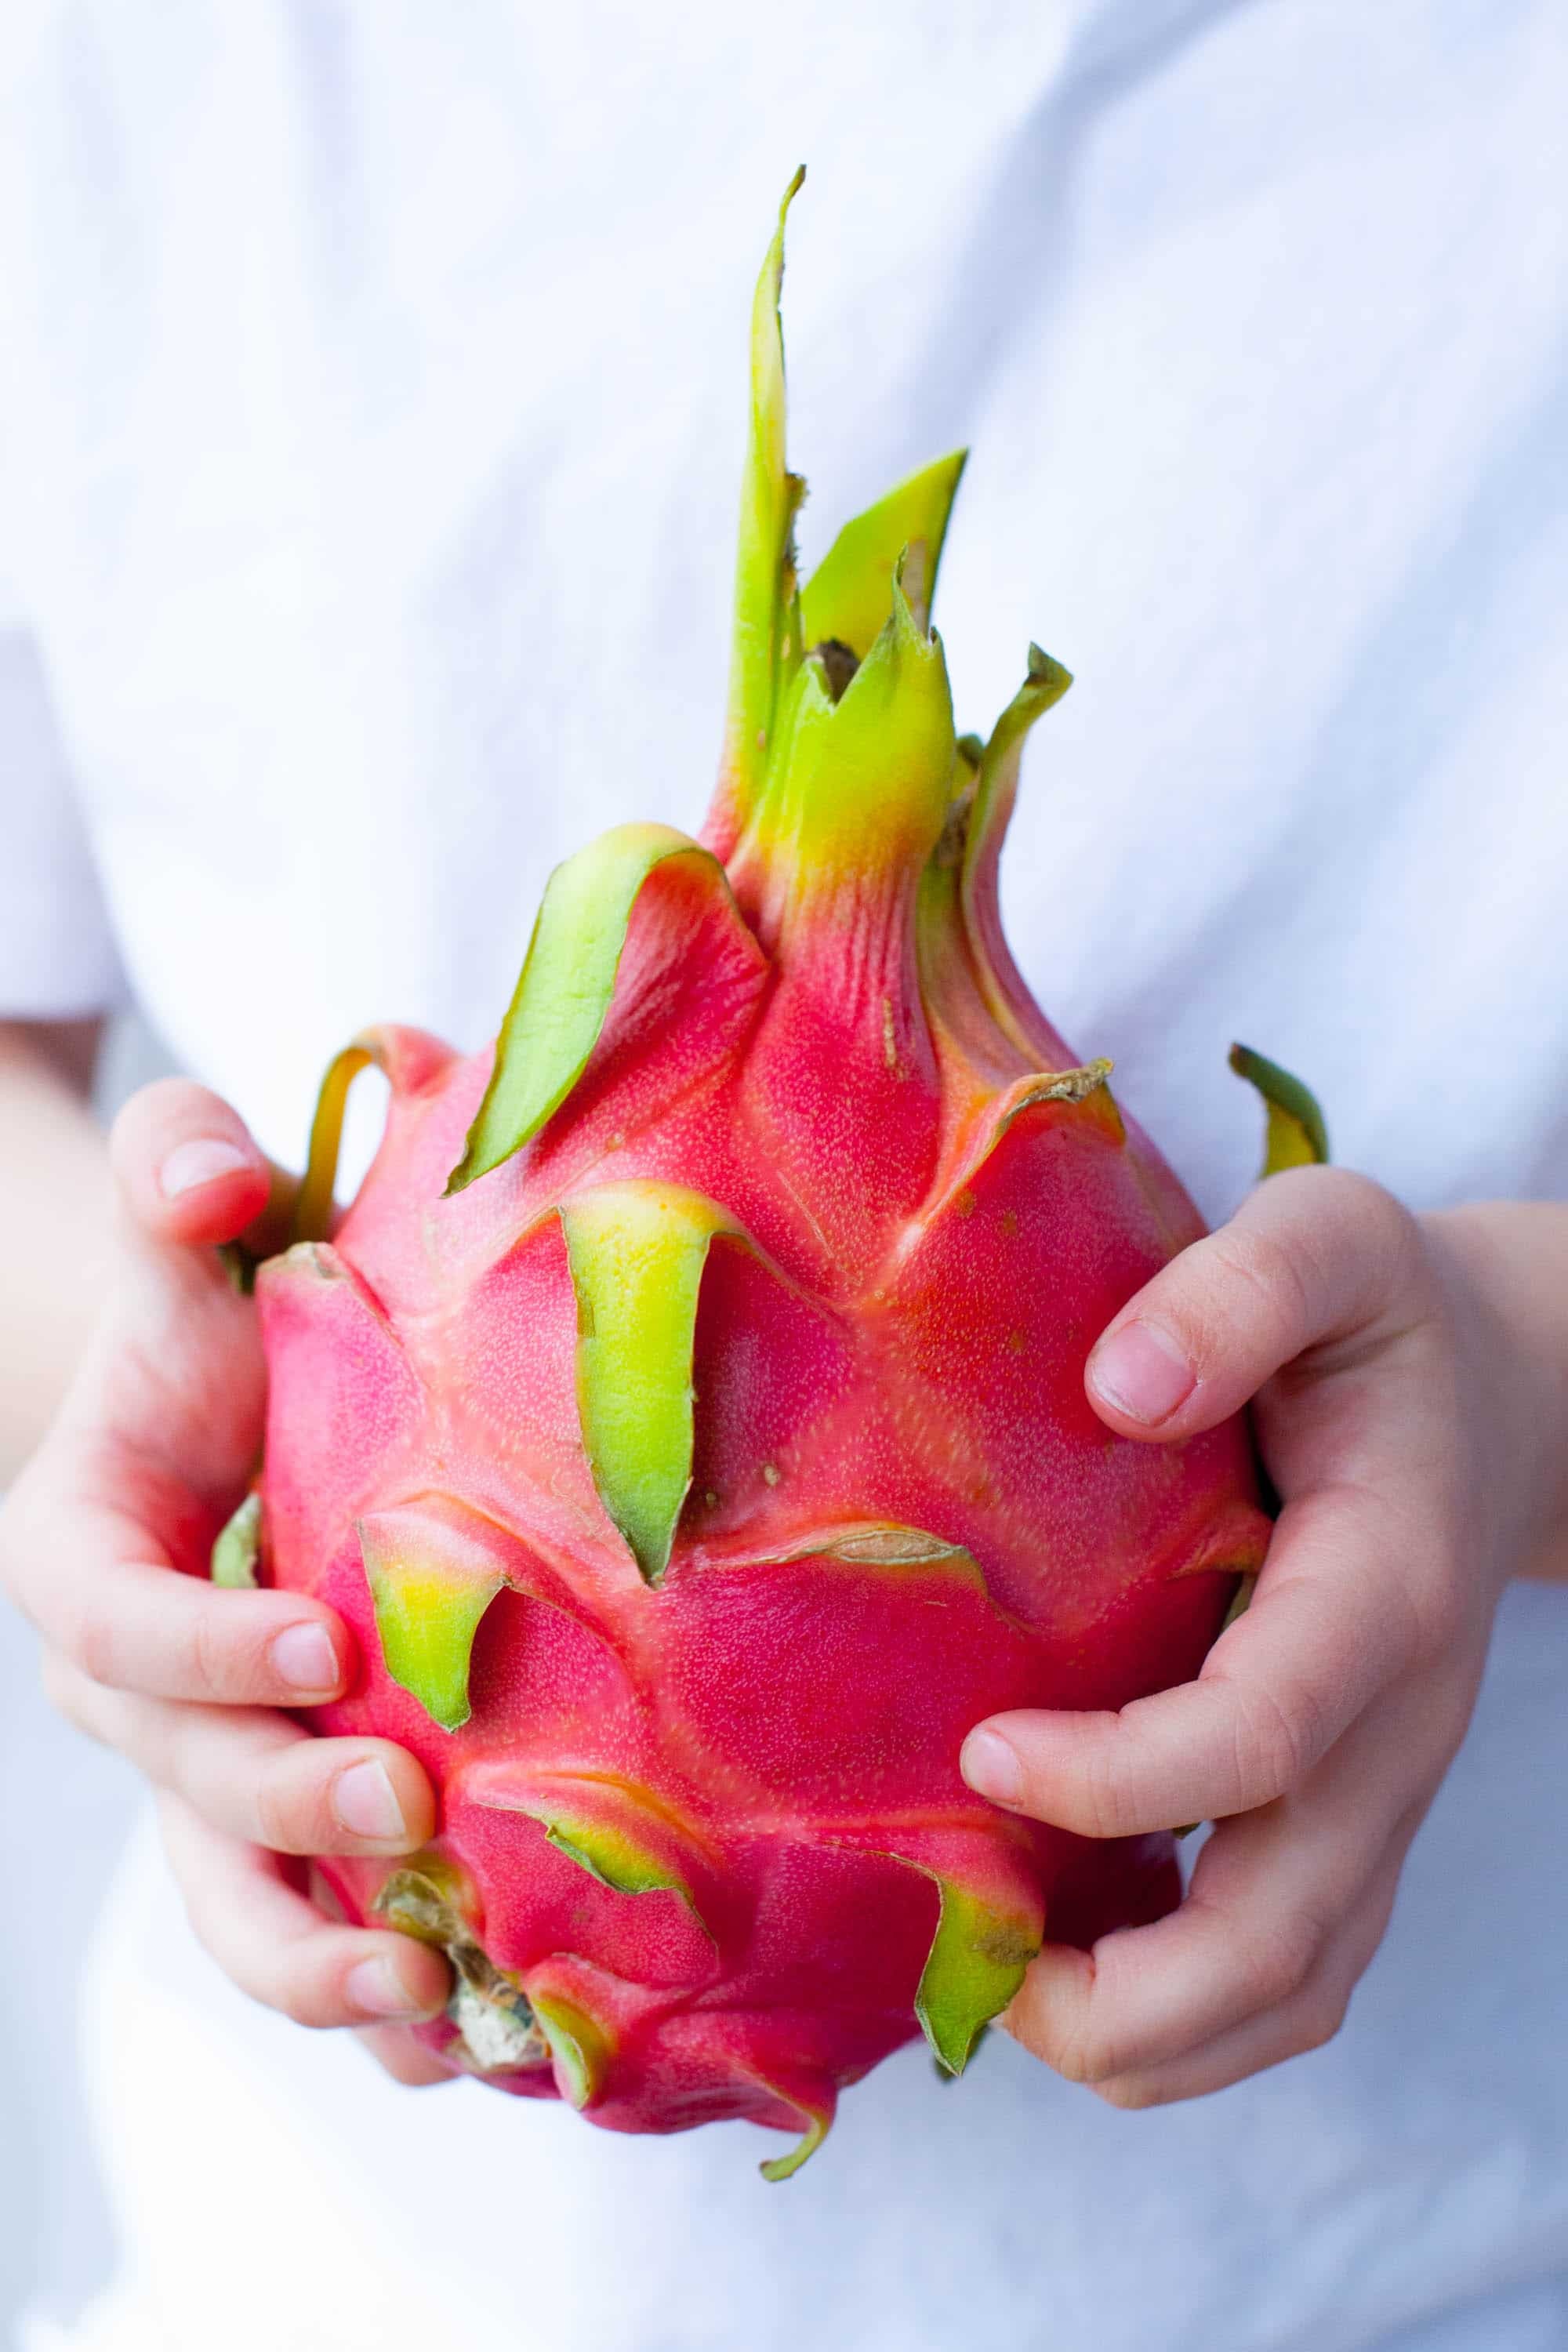 Dragon Fruit: Known for its leather-like skin and scaly spikes on the fruit exterior. 2000x3000 HD Background.